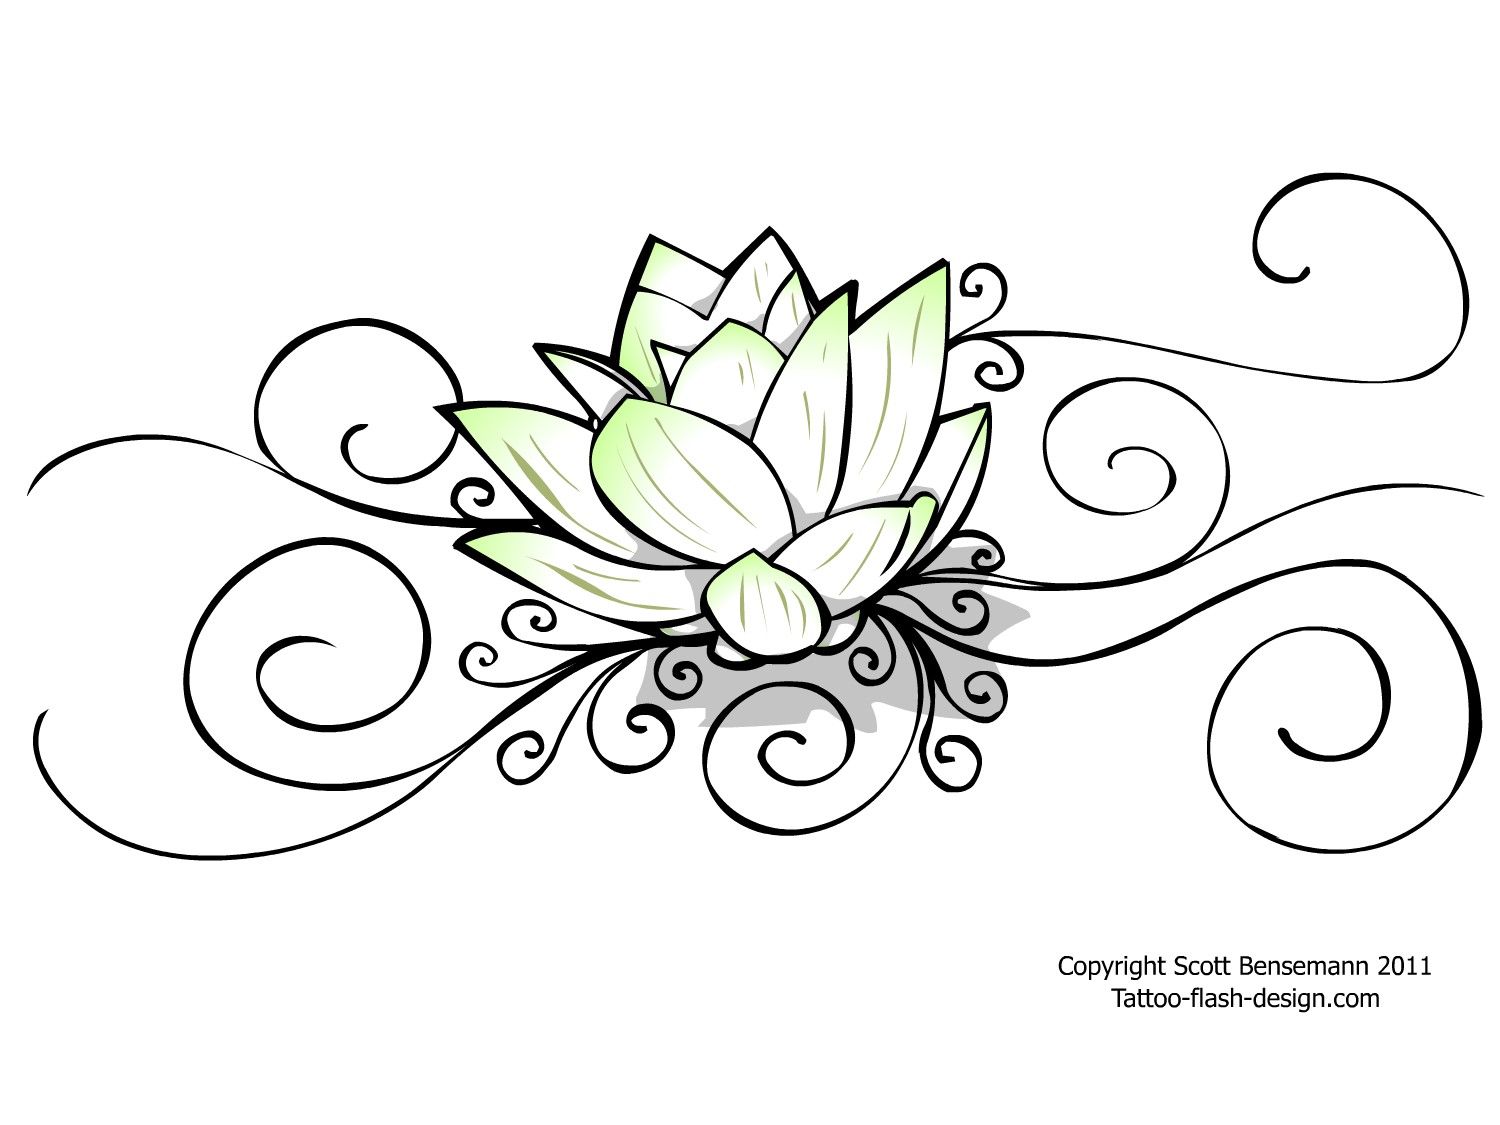 Outline Diamond Tattoo Design: Real Photo, Pictures, Images and ...